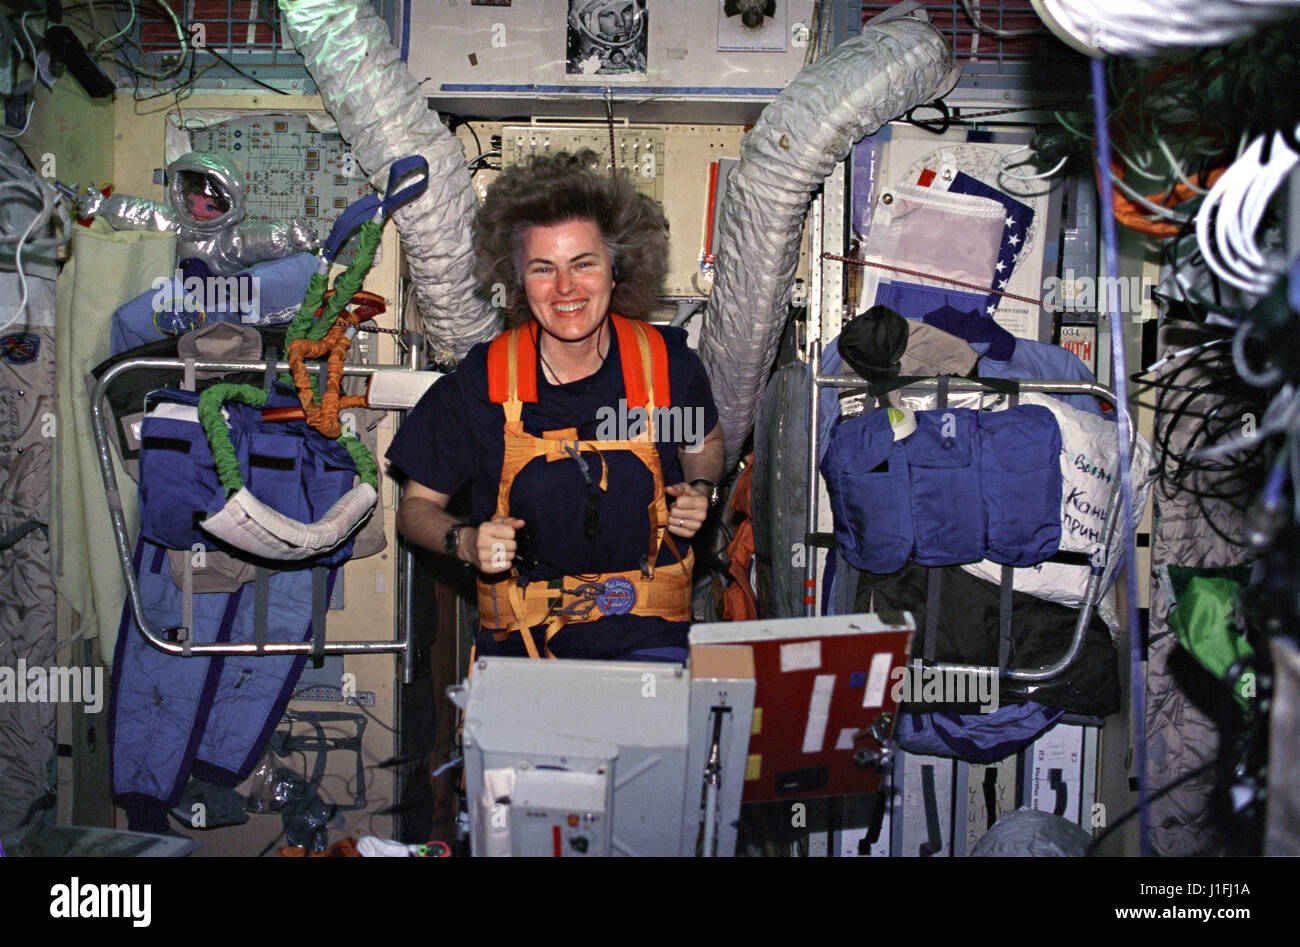 NASA astronaut Shannon Lucid exercises on a treadmill aboard the Russian Mir space station Base Block module March 28, 1996 in Earth orbit.   (photo by NASA Photo /NASA   via Planetpix) Stock Photo